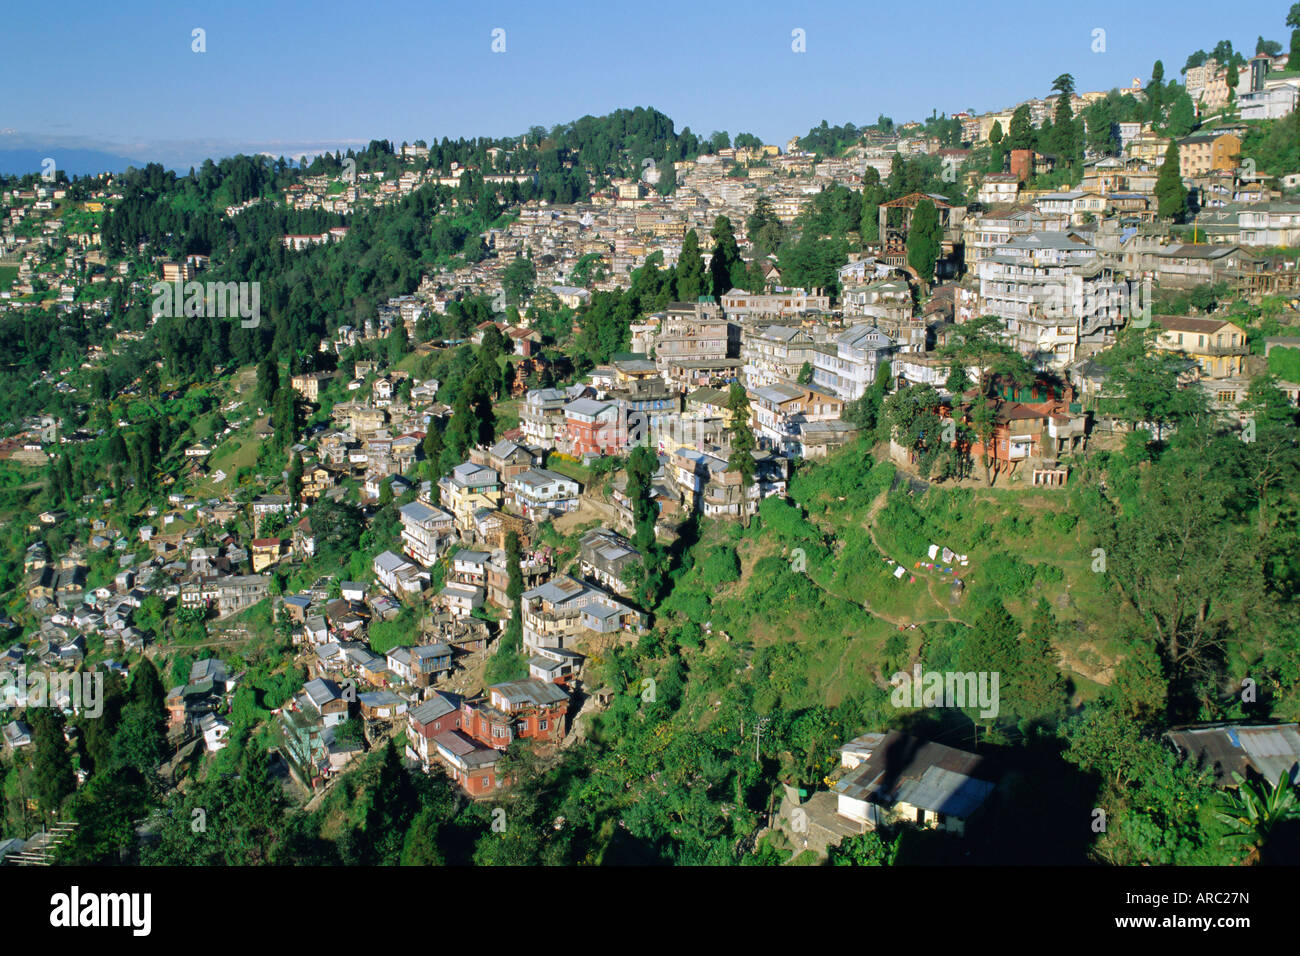 Darjeeling, old British hill station established in the 1800s, West Bengal, India Stock Photo